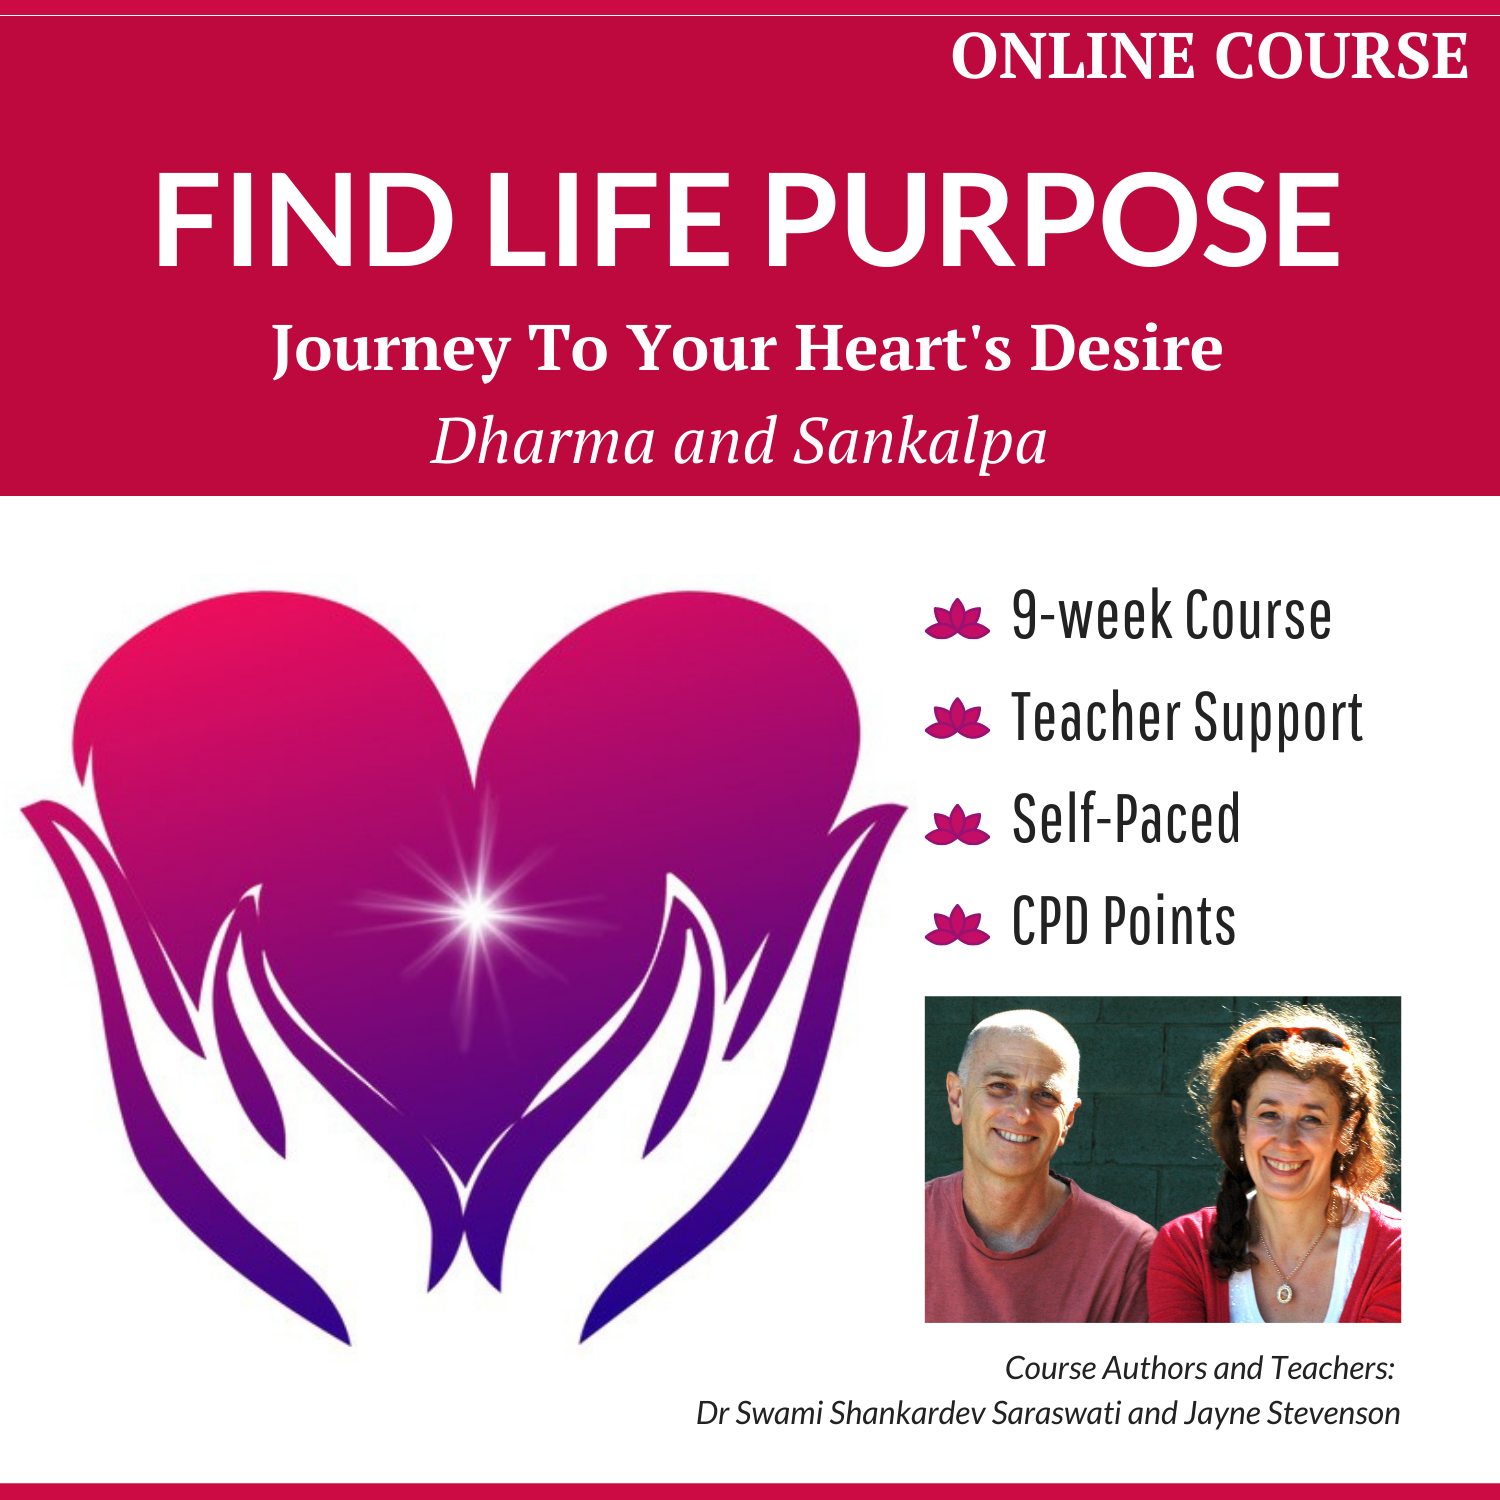 Find Life Purpose Online Course